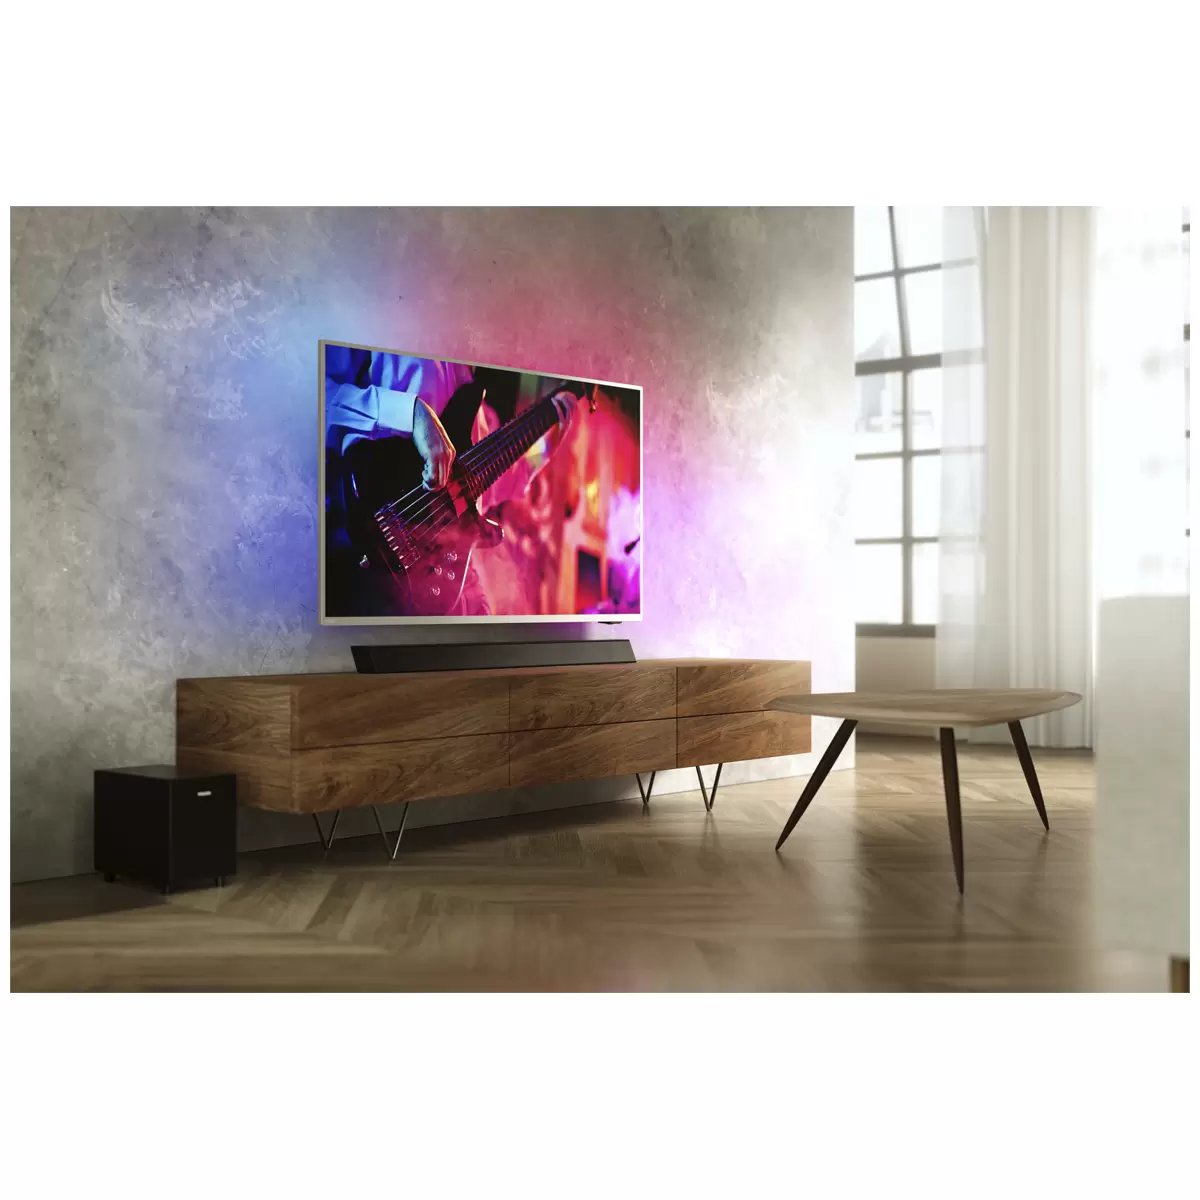 Philips 2.1 Channel Soundbar with Wireless Subwoofer TAB5305/98